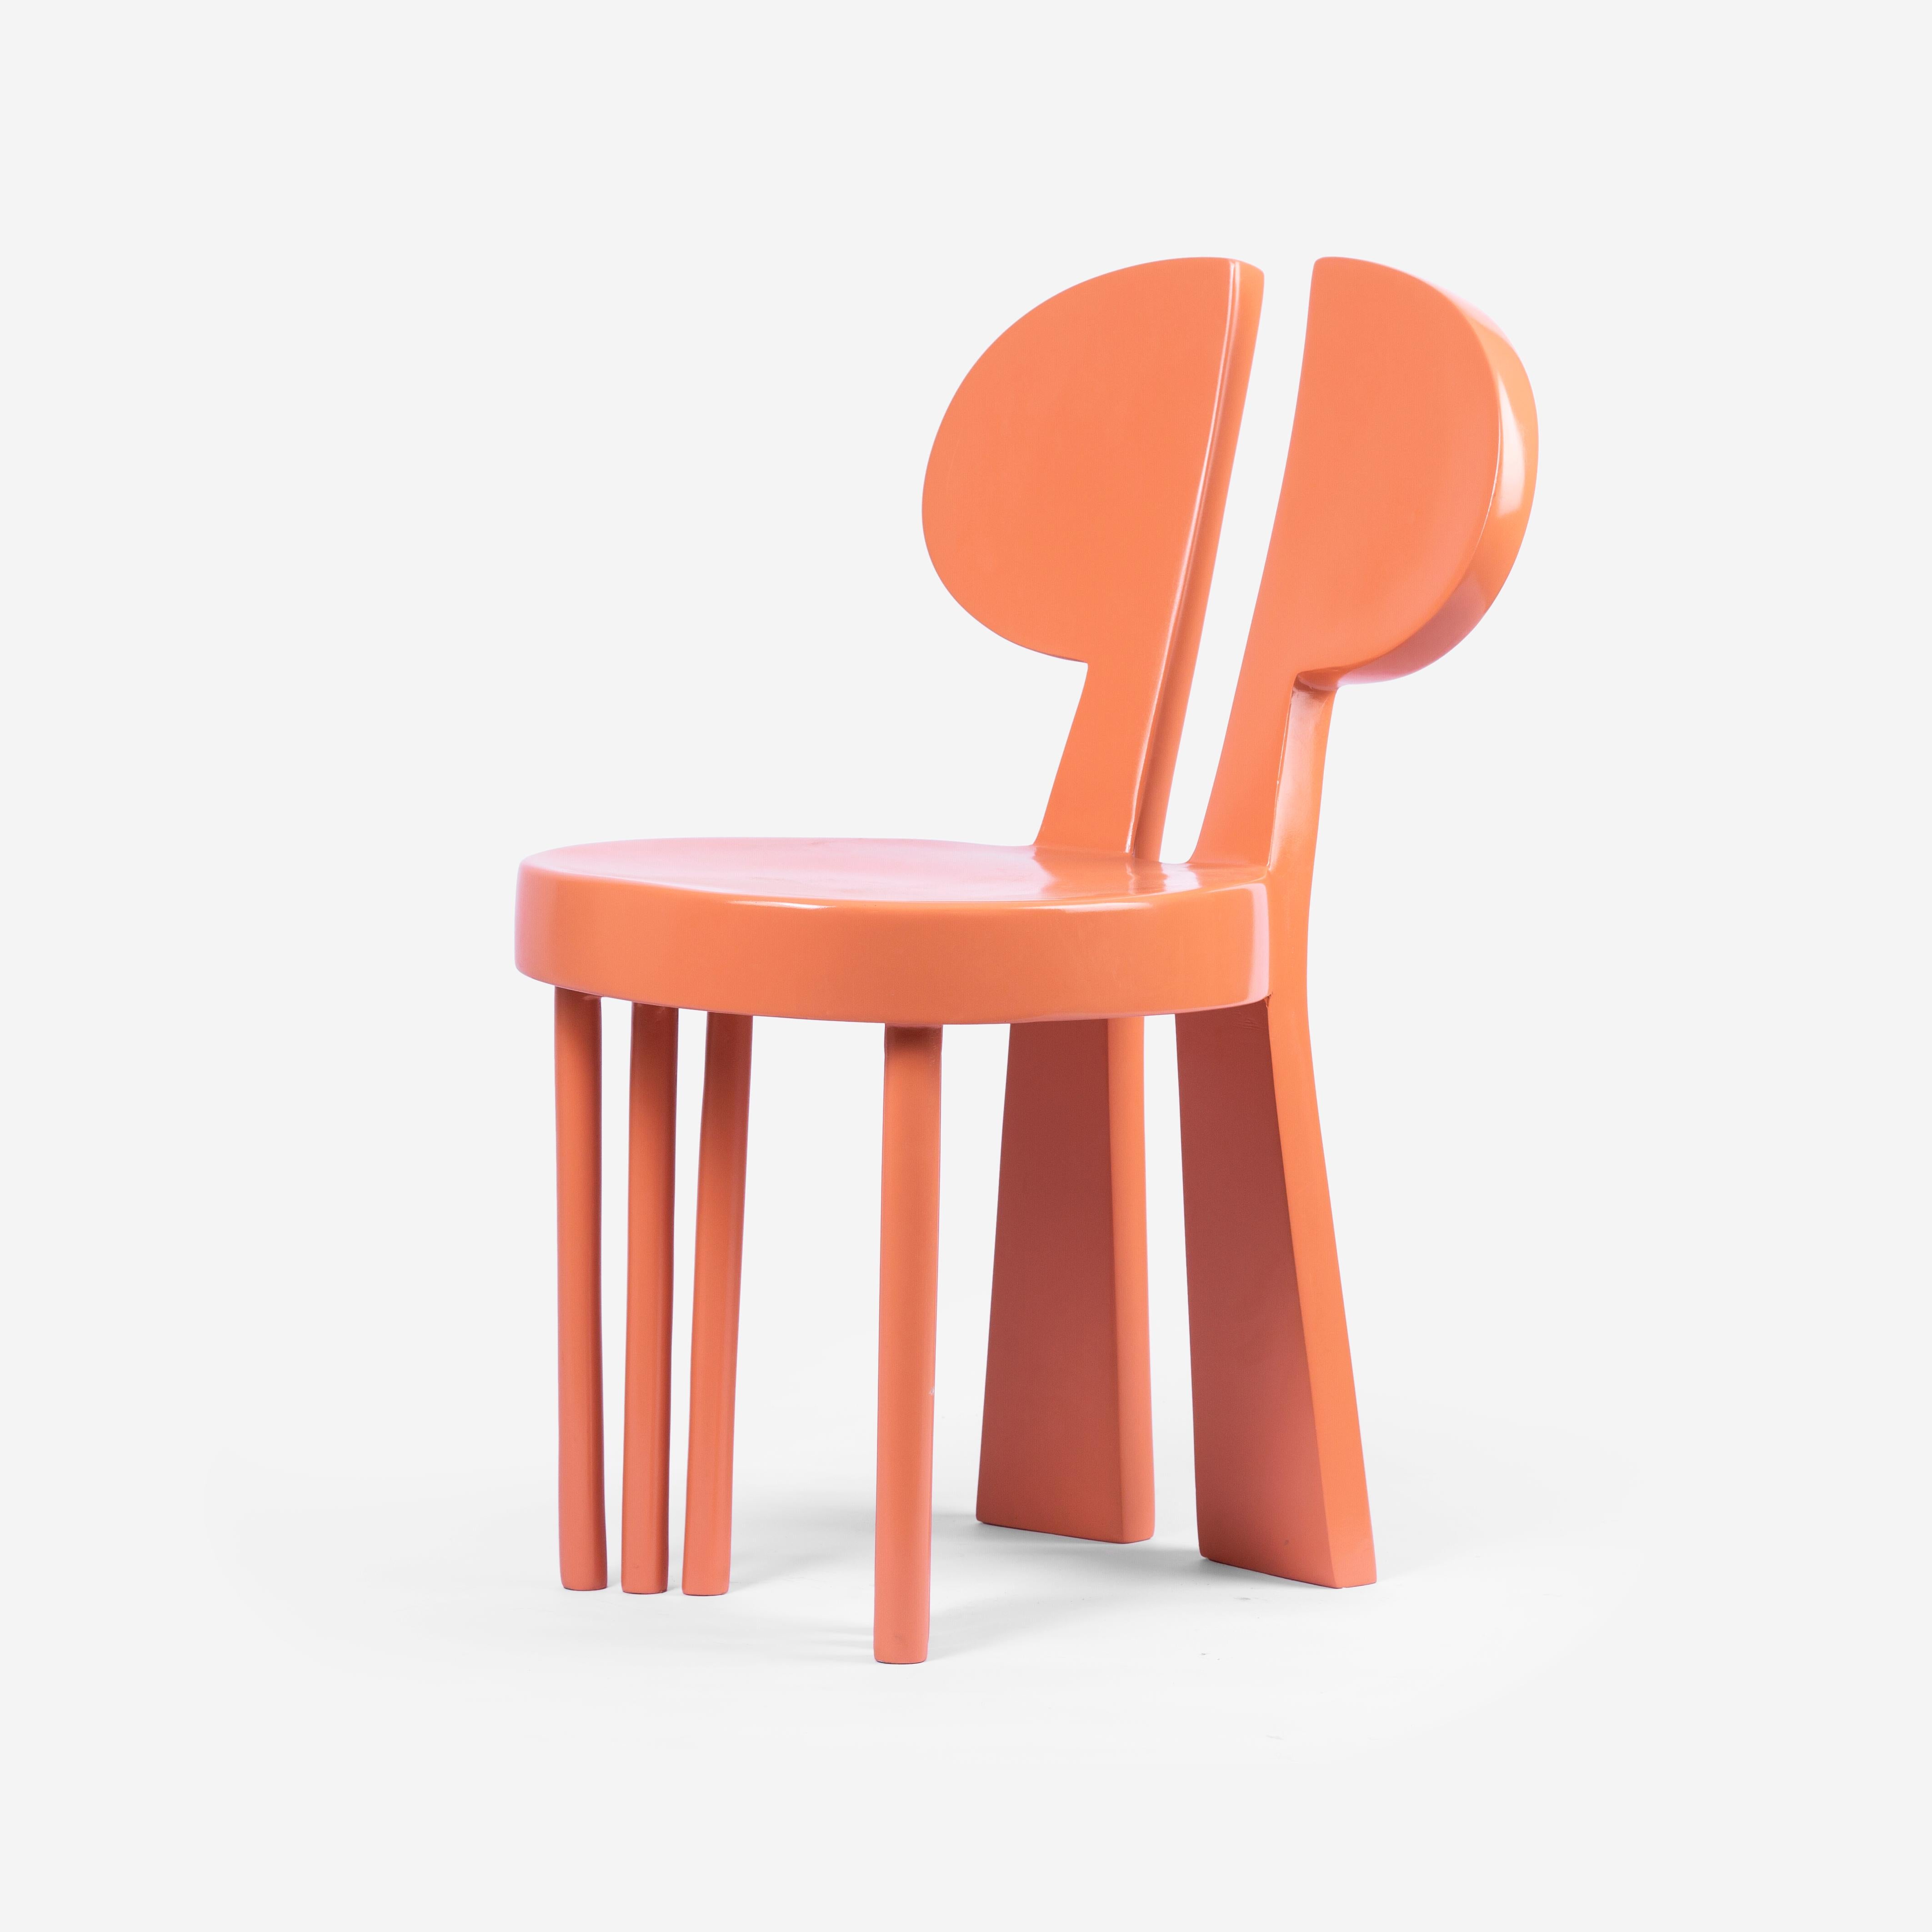 Orange Weather-Resistant Fiberglass Outdoor Dining Chair with Bold Design 1